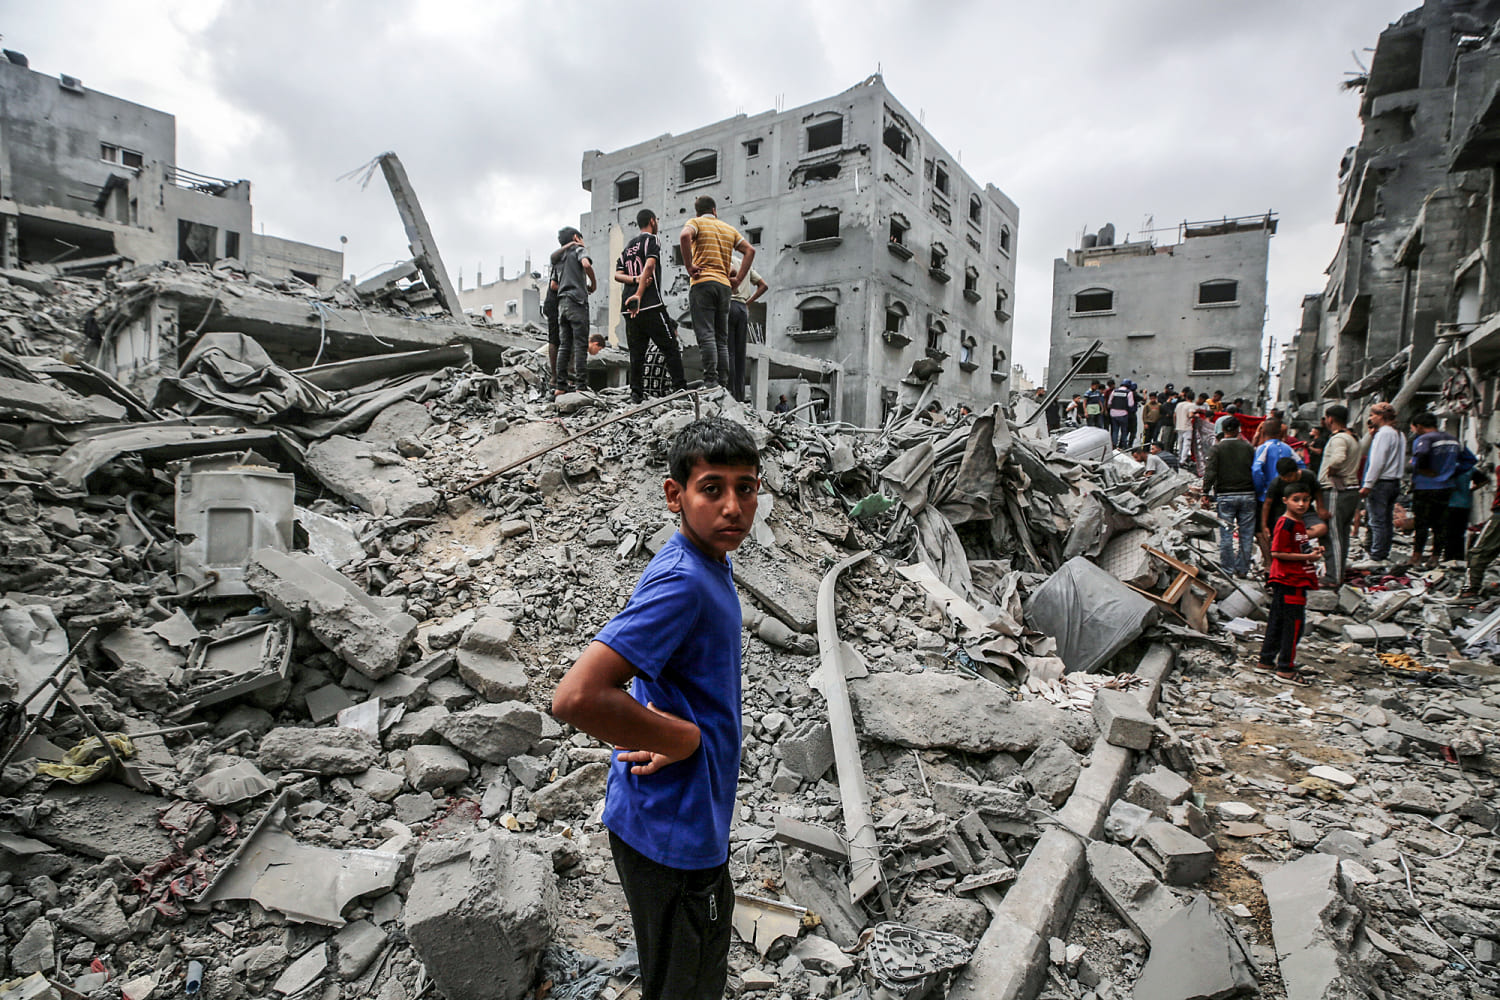 Turkey halts all trade with Israel until permanent Gaza cease-fire